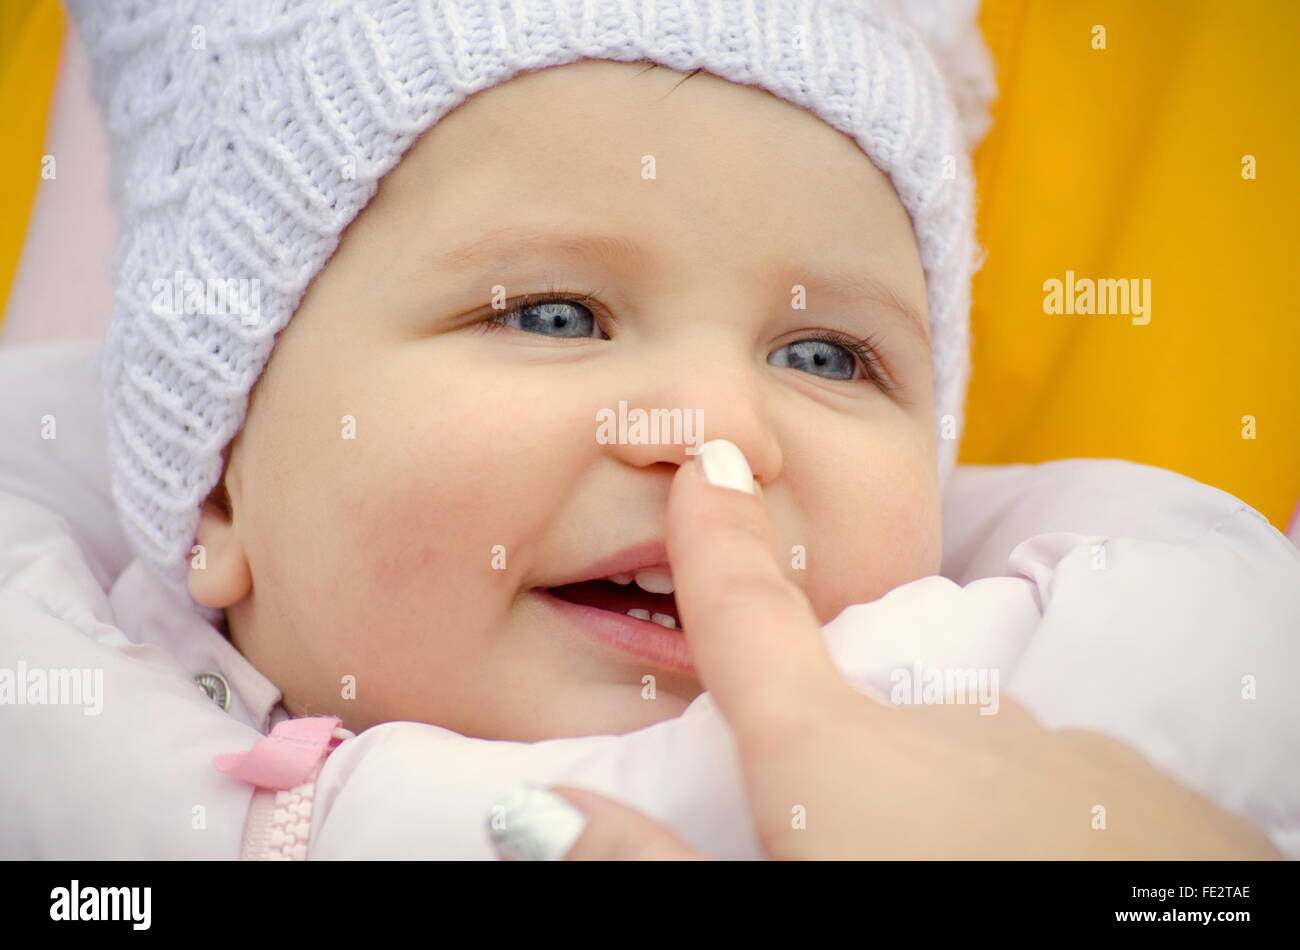 touch a smiling baby's nose Stock Photo